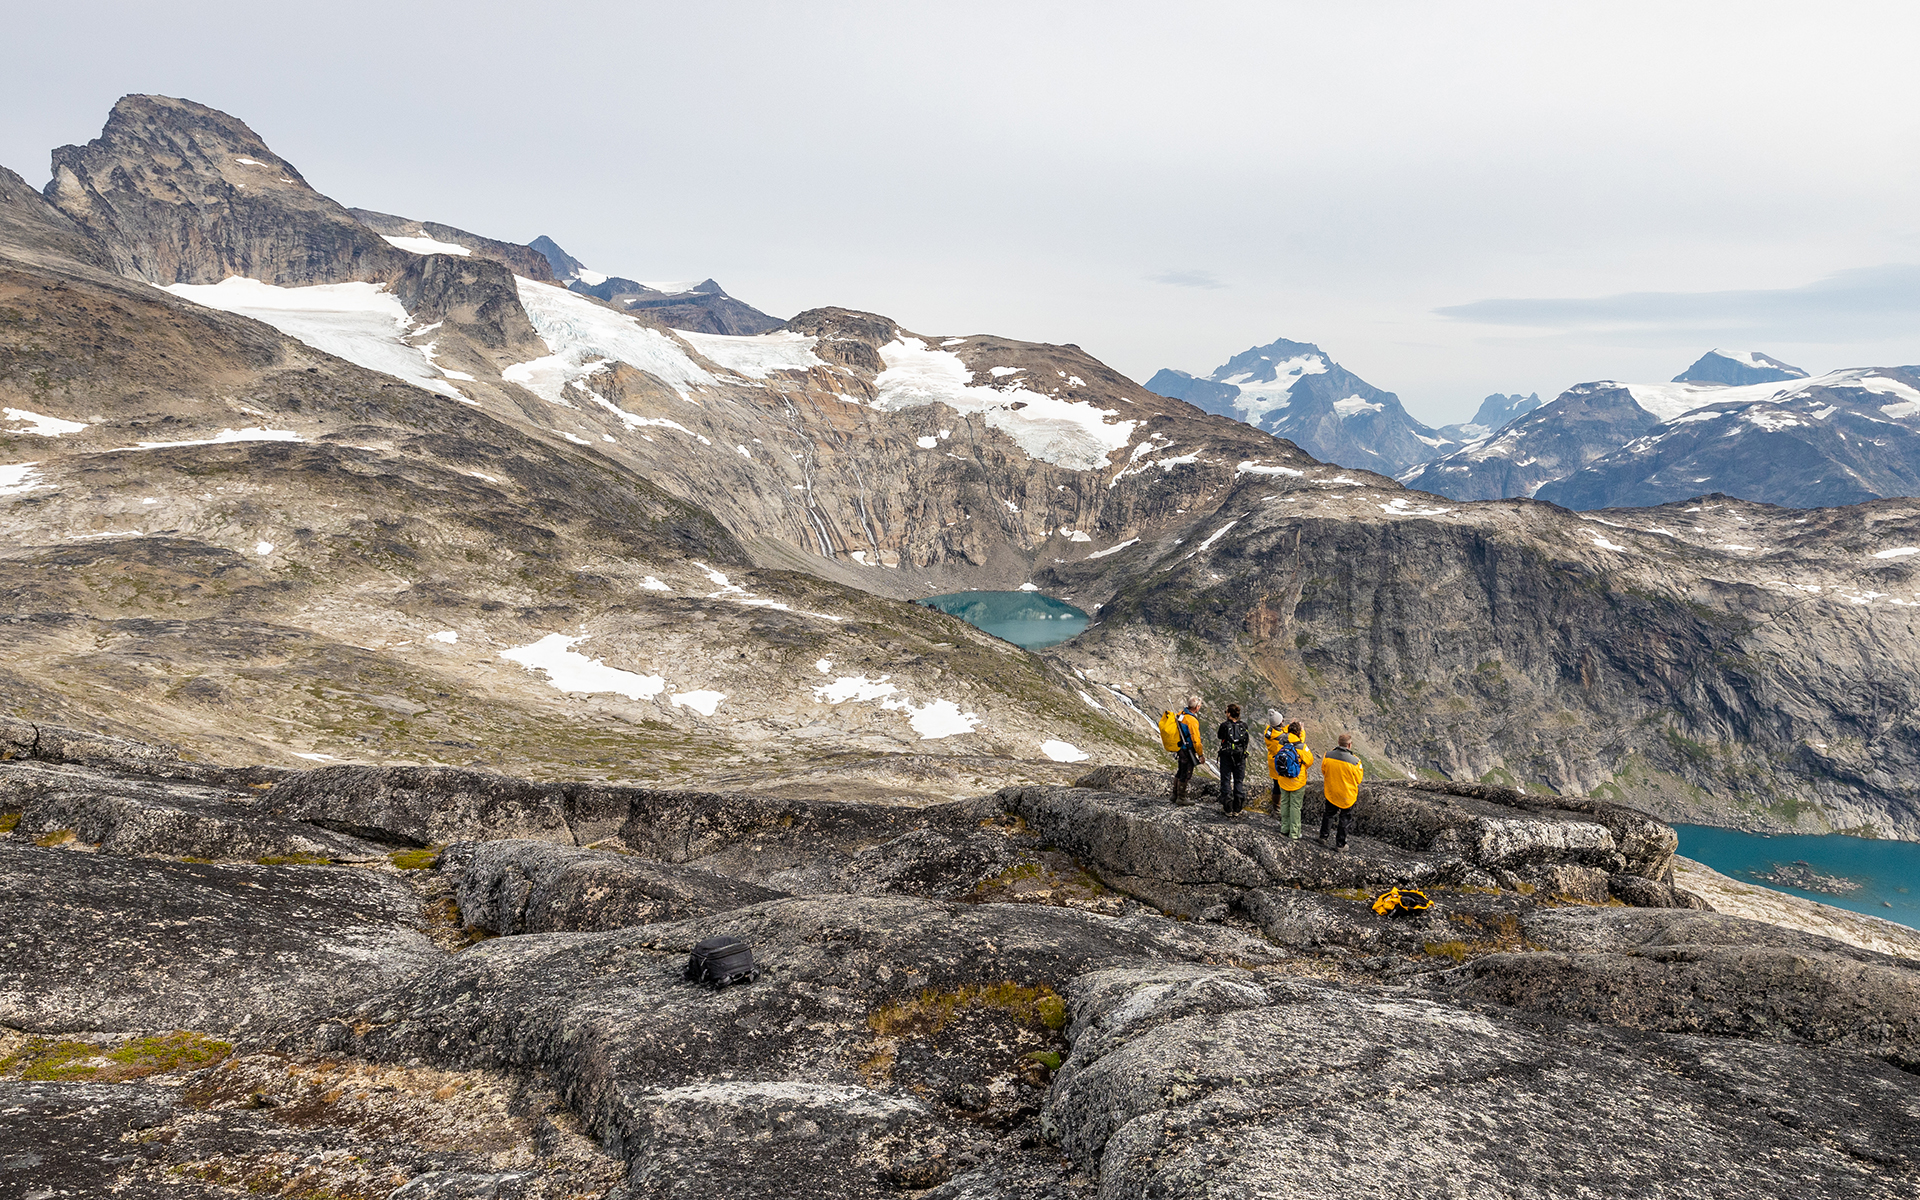 A group of five travelers in yellow jackets stands on a rocky ridge overlooking fjords below and mountains dotted with snow on the ridge above them